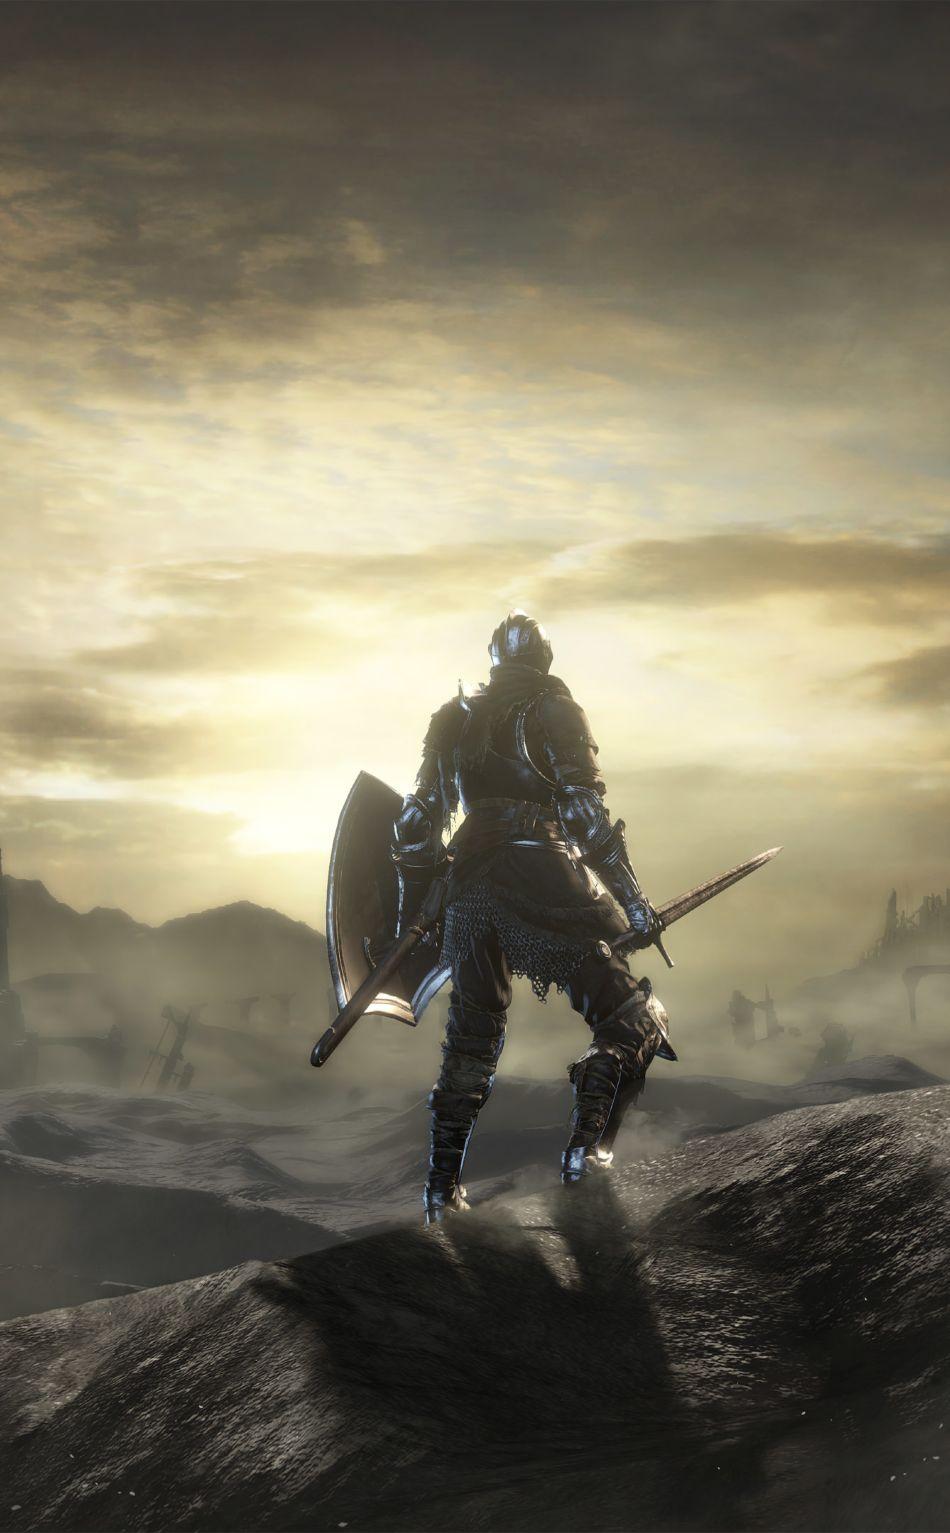 Found these cool dark souls 3 ios wallpapers Felt like I hade to share    rdarksouls3